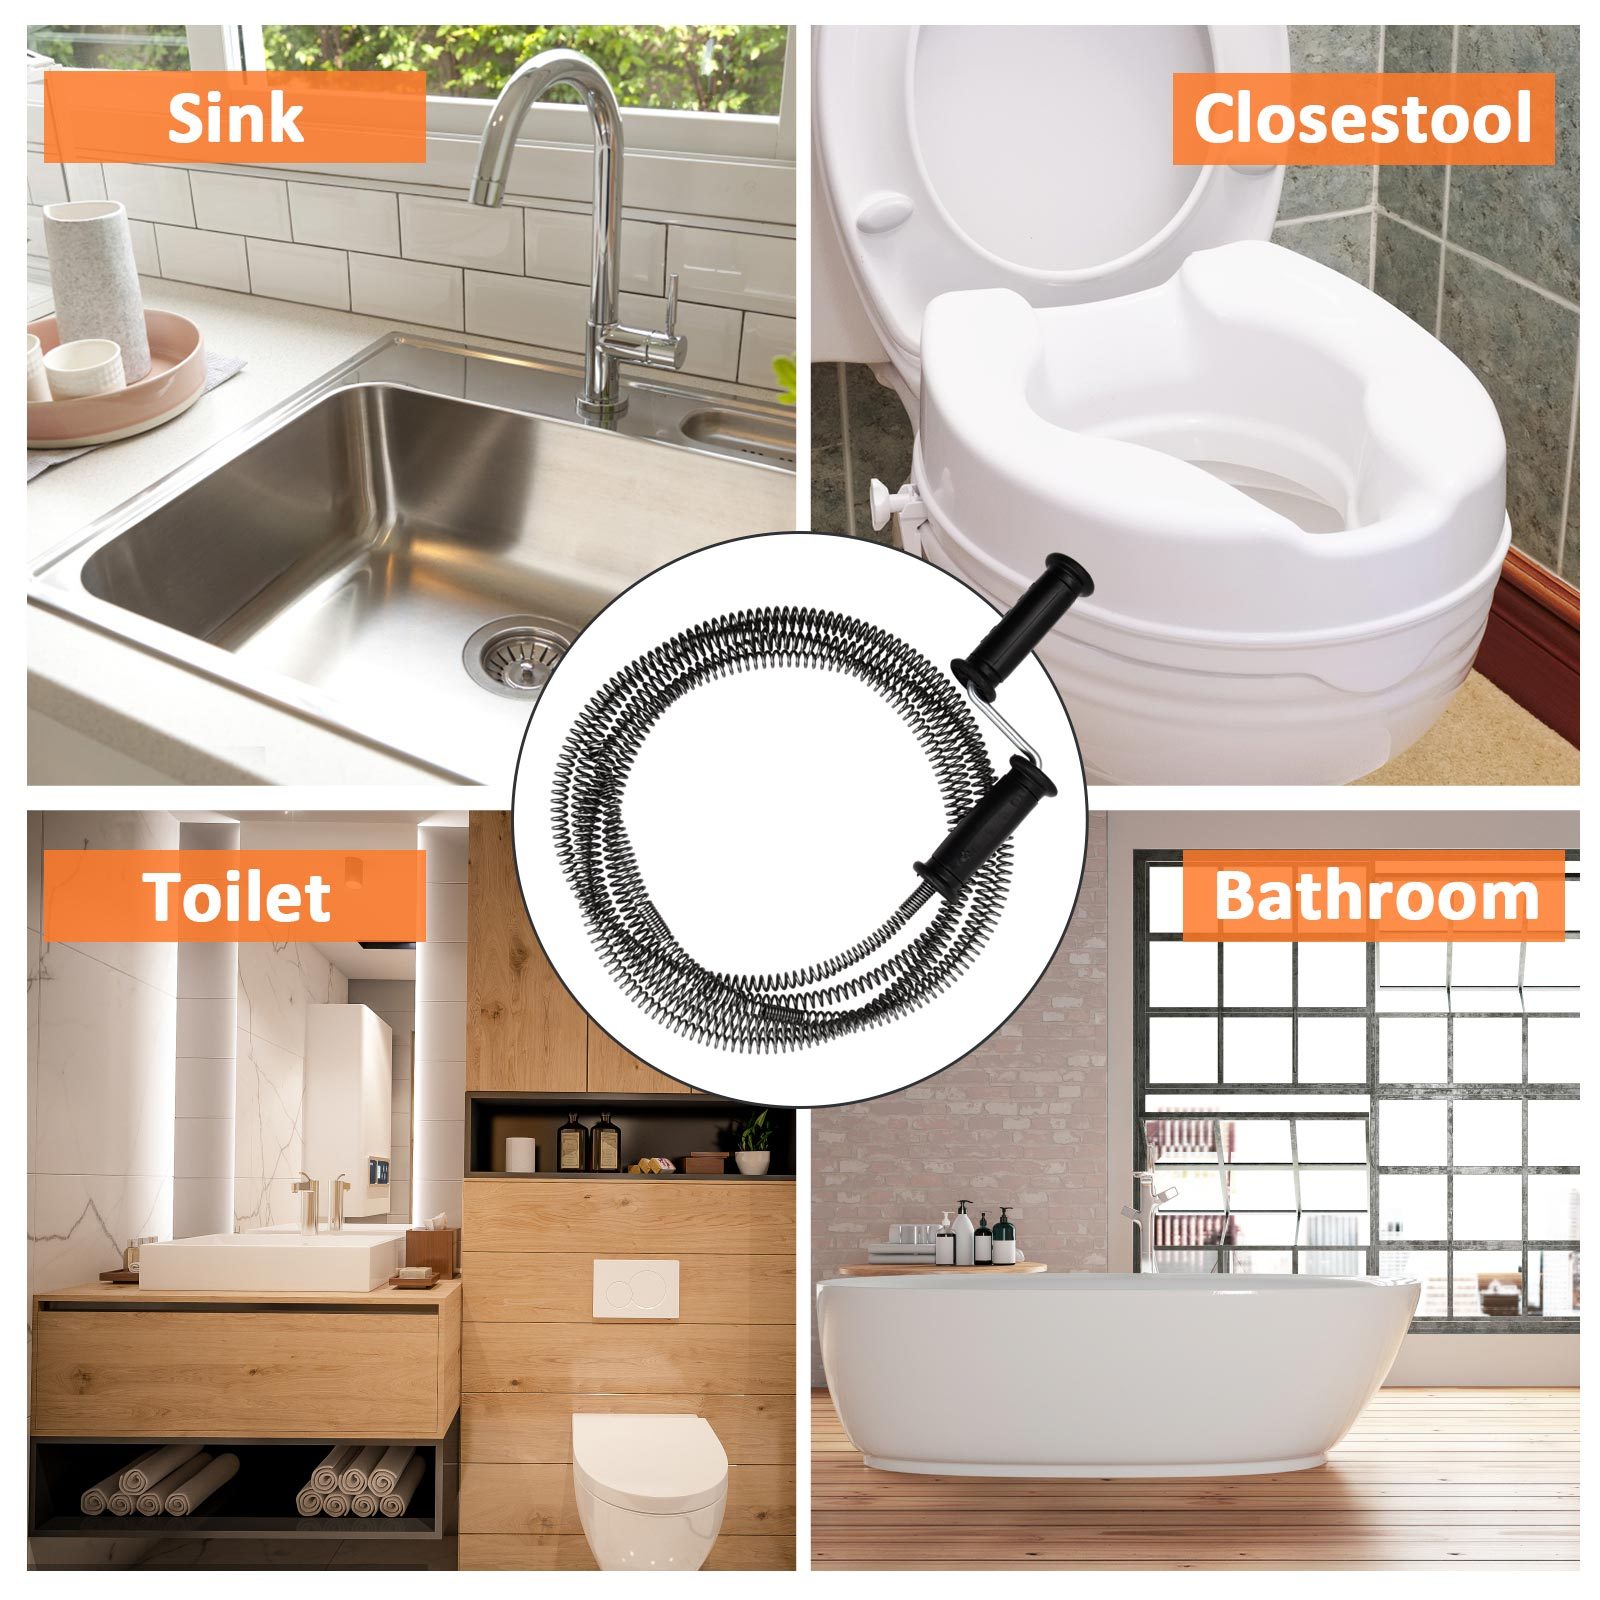 flexible-sink-drain-snake-pipe-cleaning-spiral-cleaner -tool-sewage-spring-9mmx2m-rotating-wooden-handle